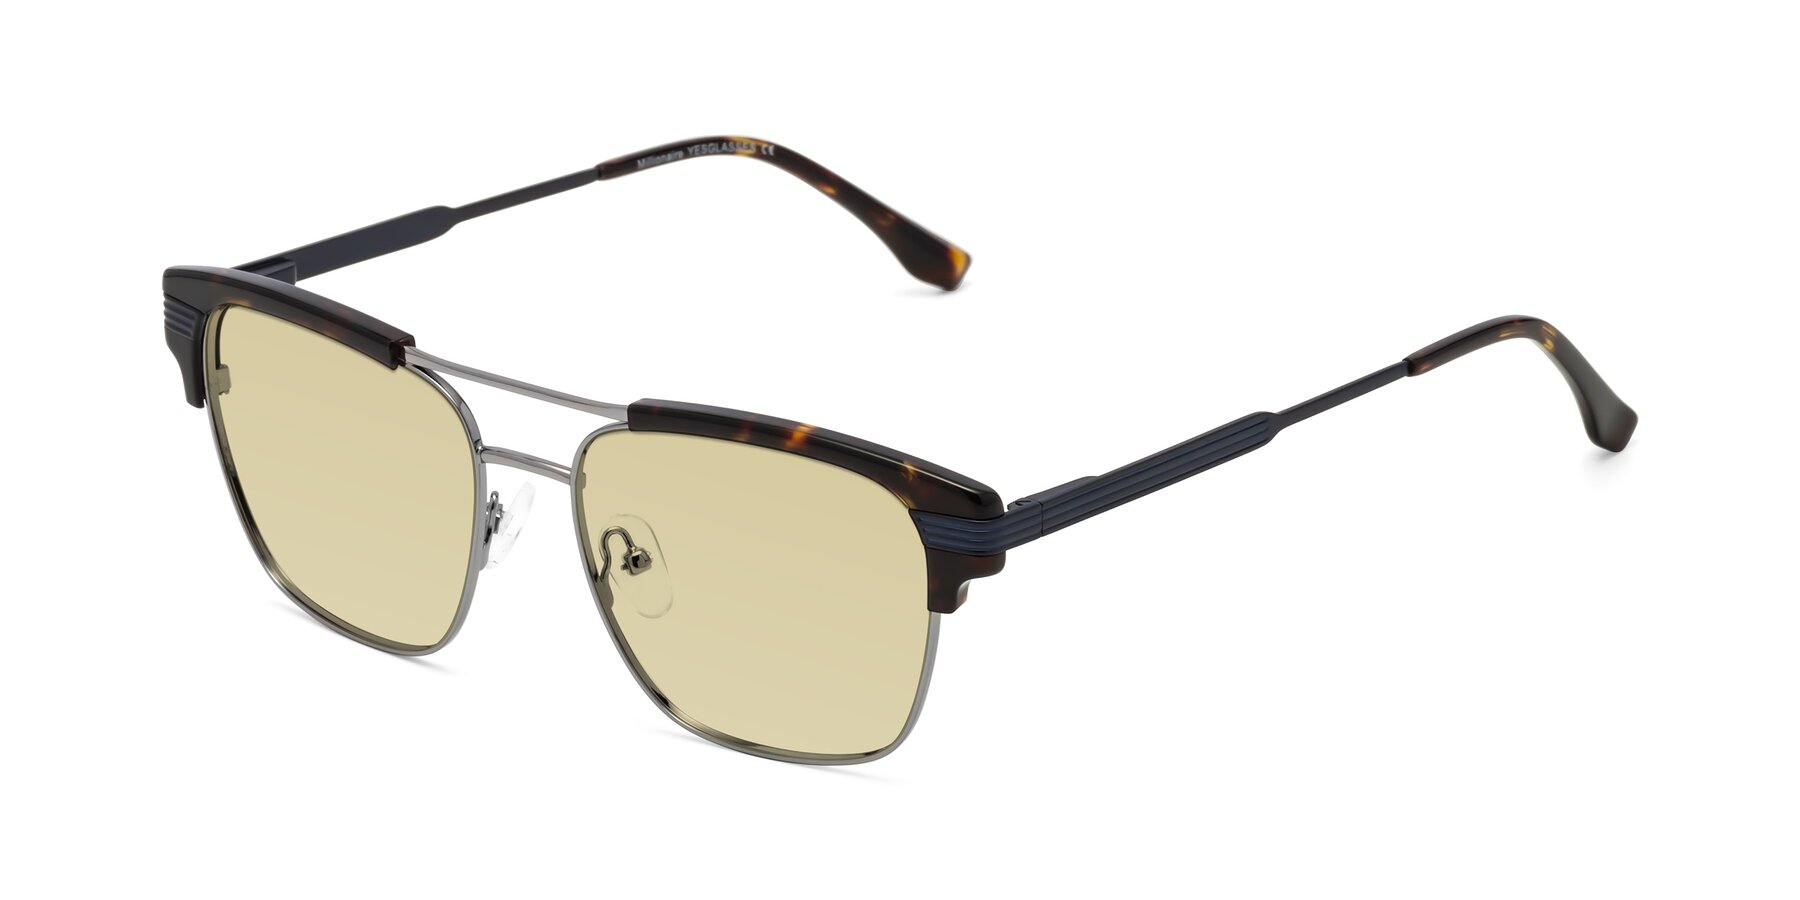 Angle of Millionaire in Tortoise-Gunmetal with Light Champagne Tinted Lenses